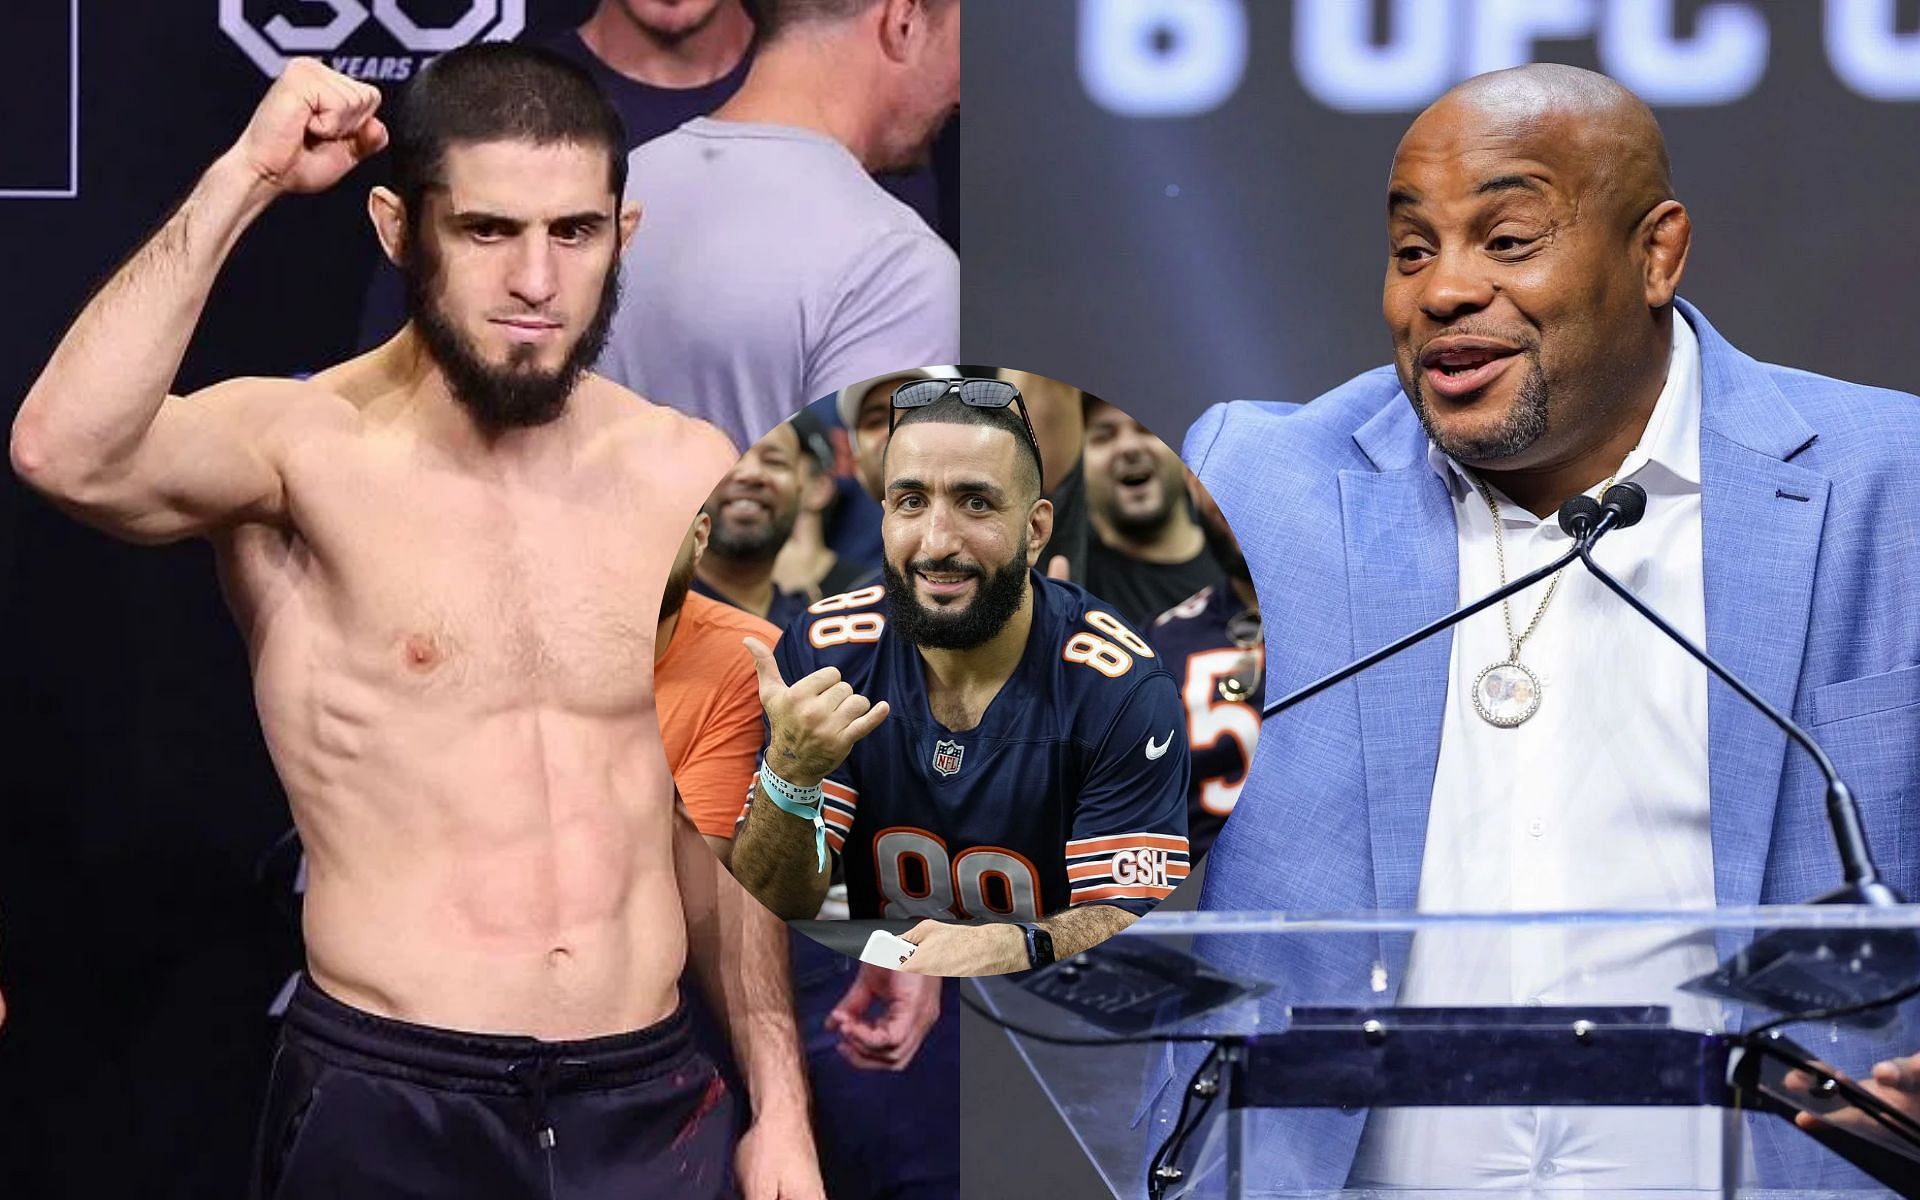 Belal Muhammad reacts to Daniel Cormier catching Islam Makhachev lying [Image courtesy: Getty Images]